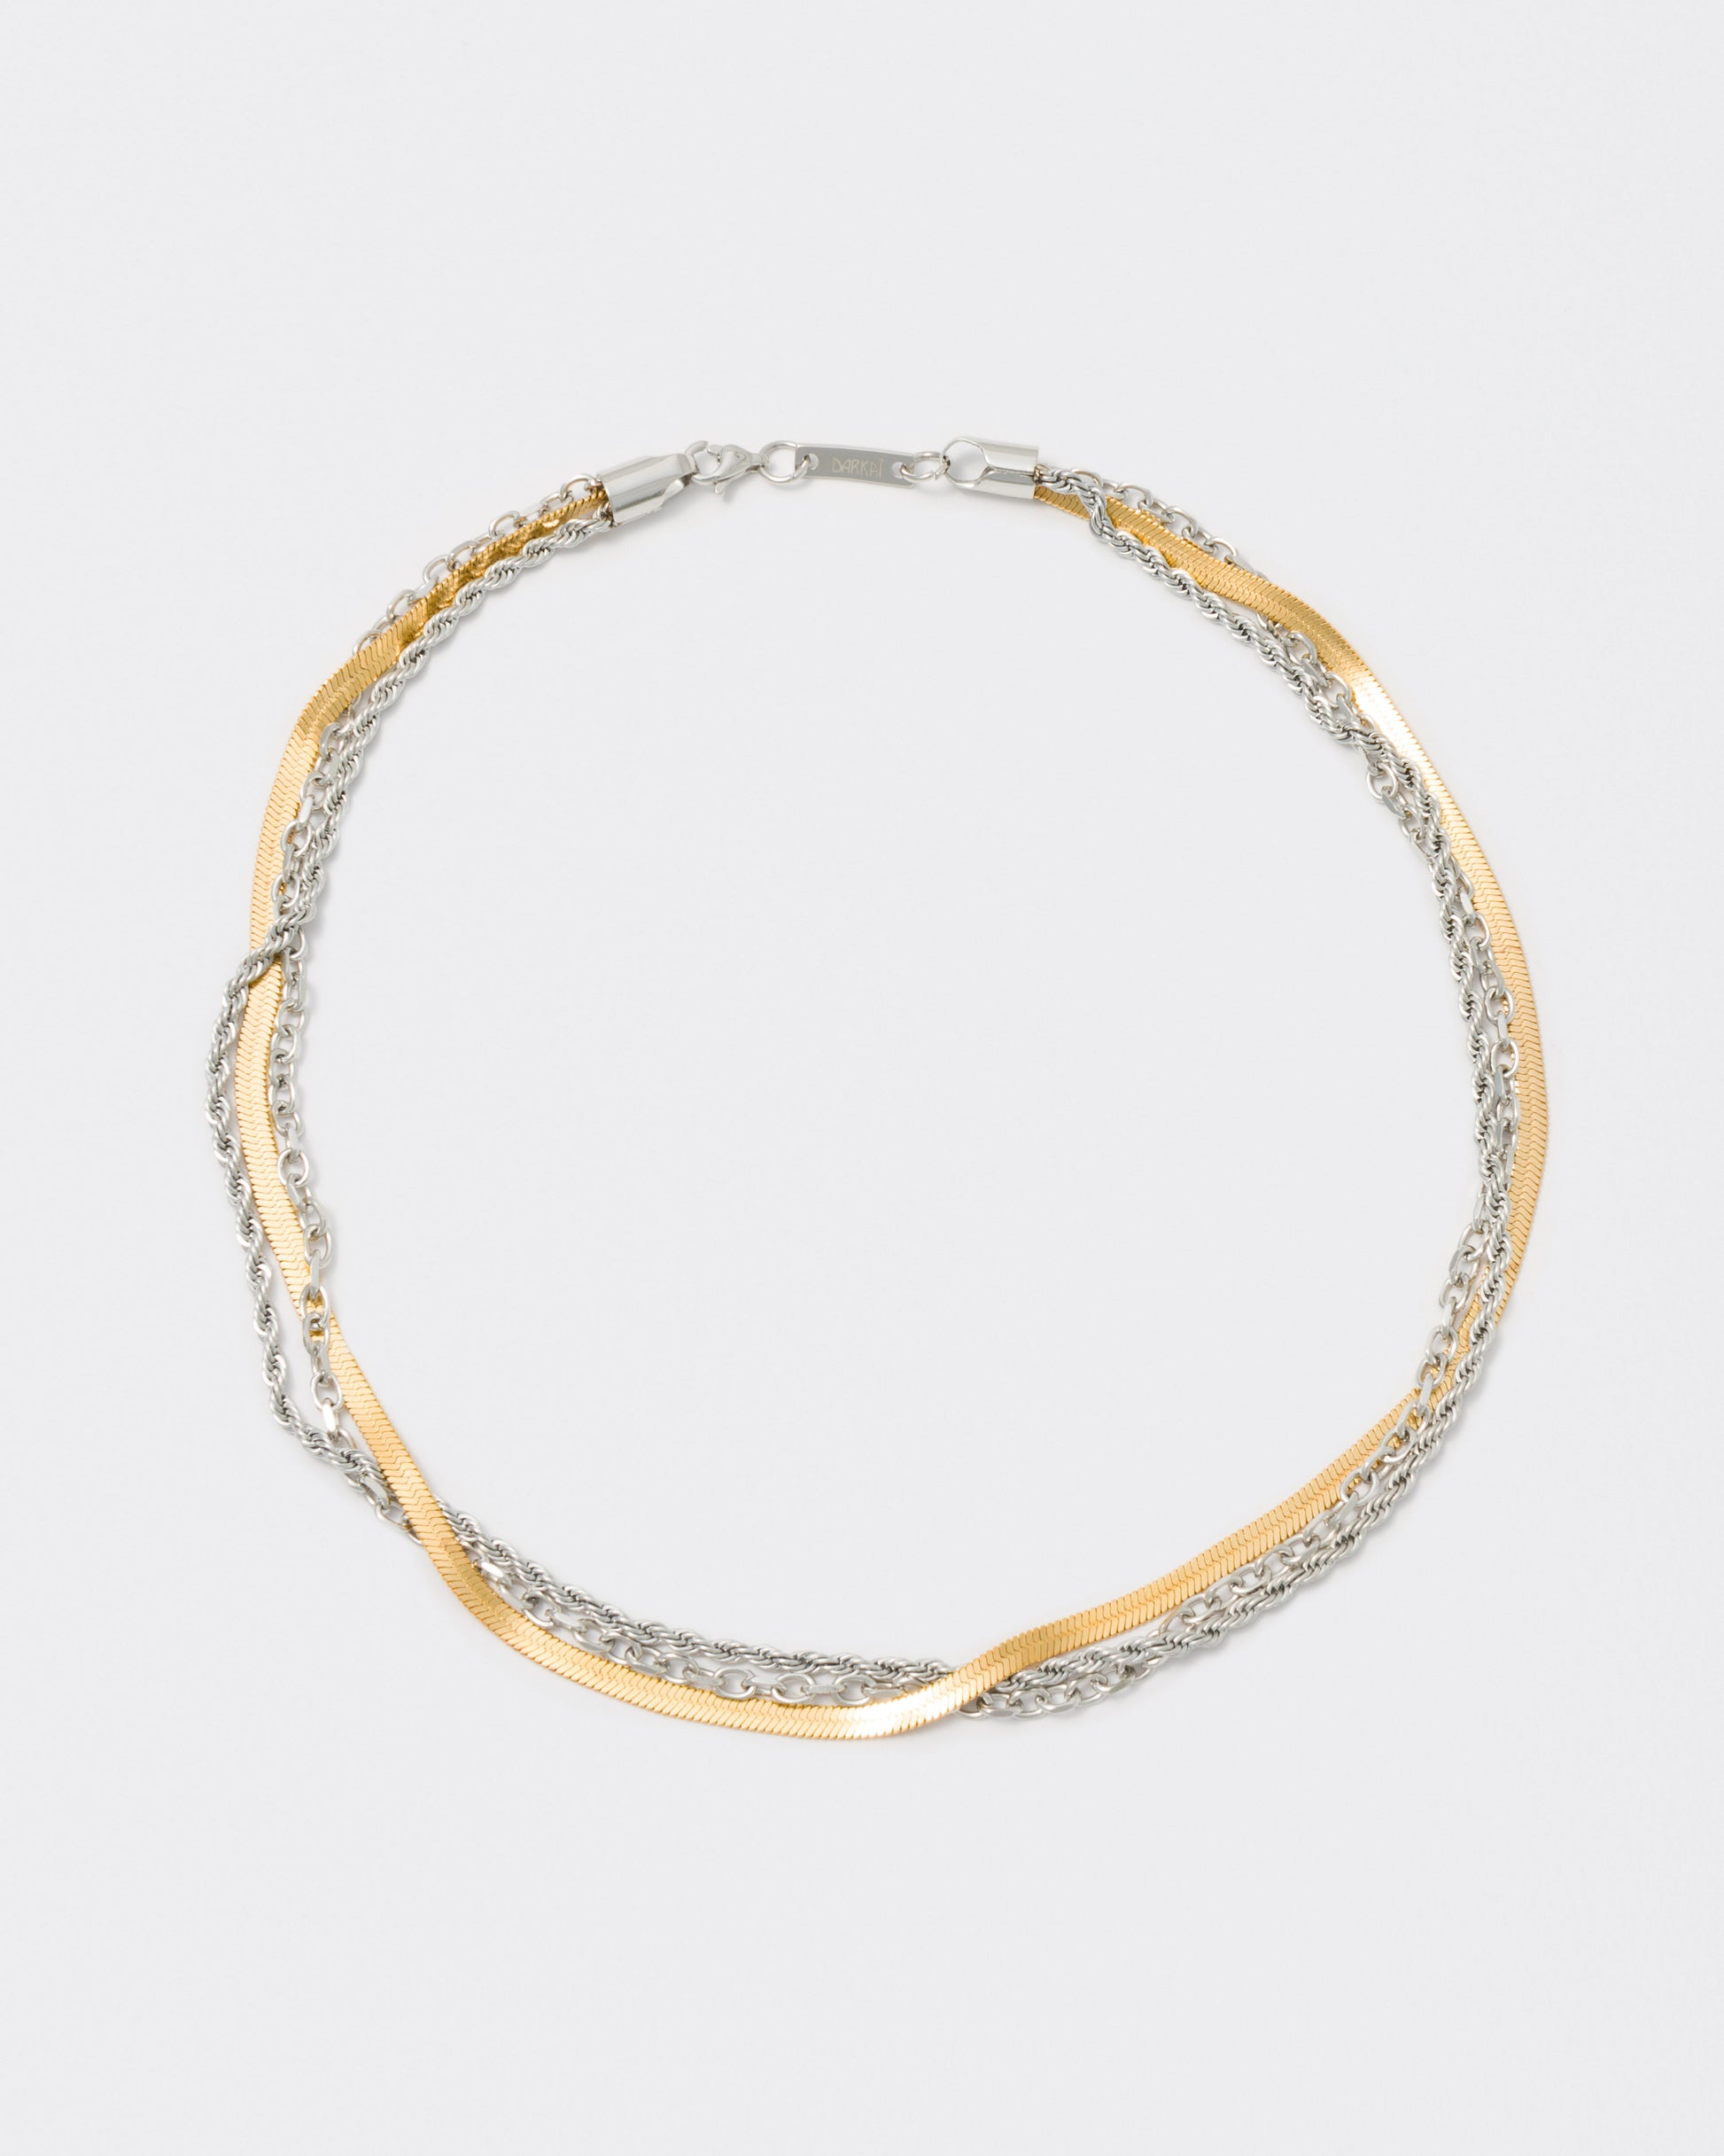 18k yellow and white gold coated layers necklace with 3mm rope and cable chain and contrasting 4mm herringbone chain